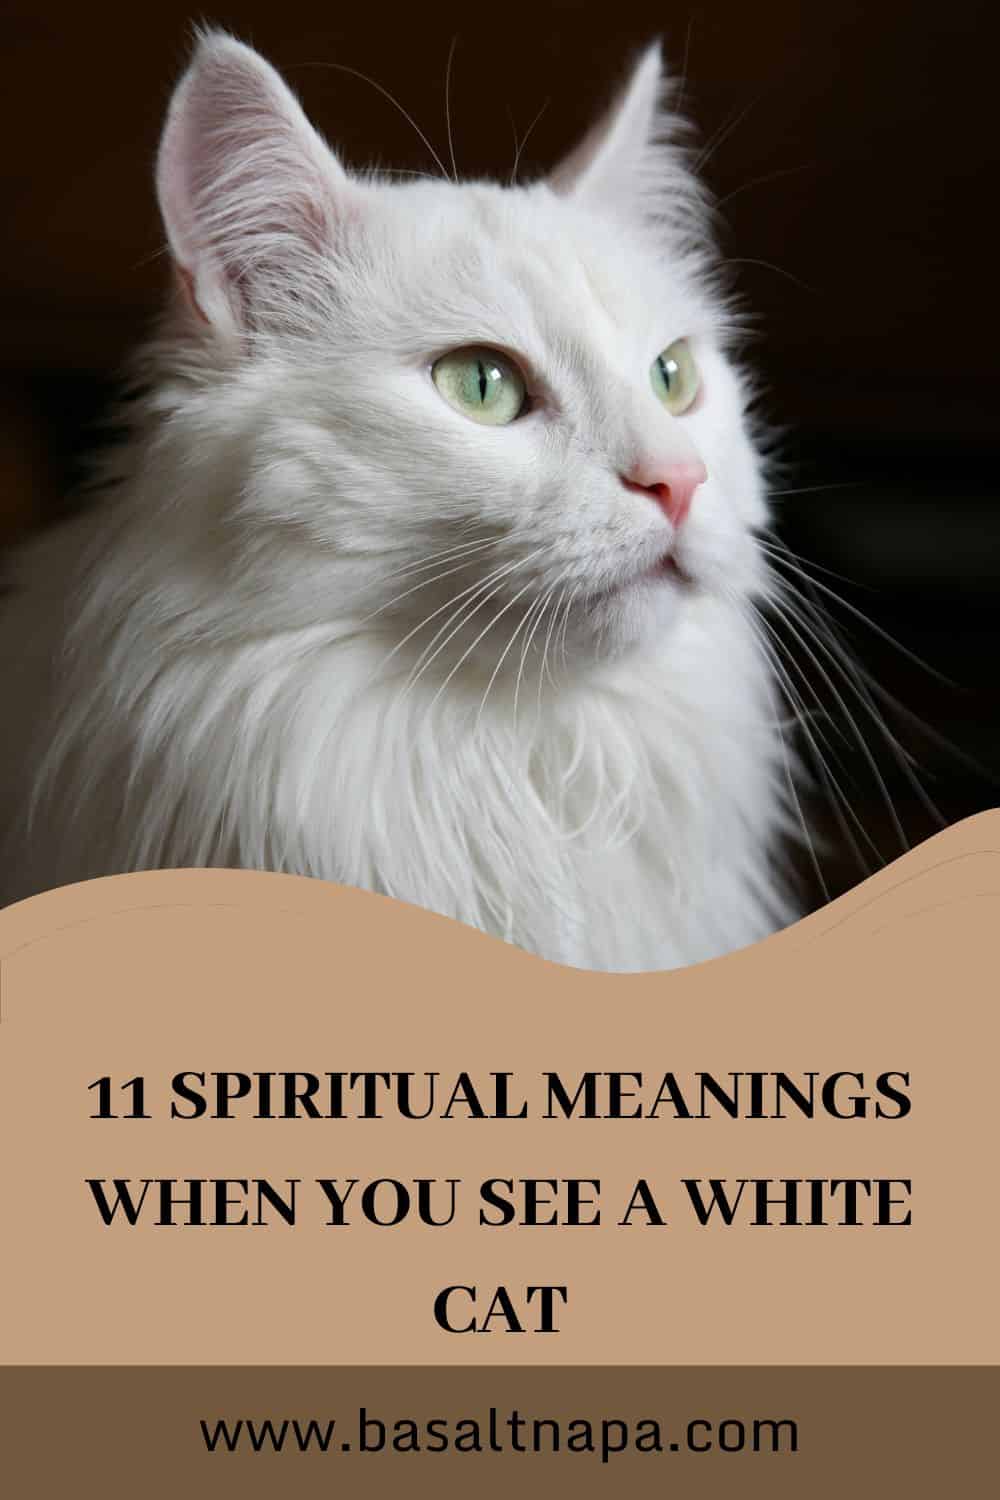 White Cat Symbolism and Spiritual Meaning